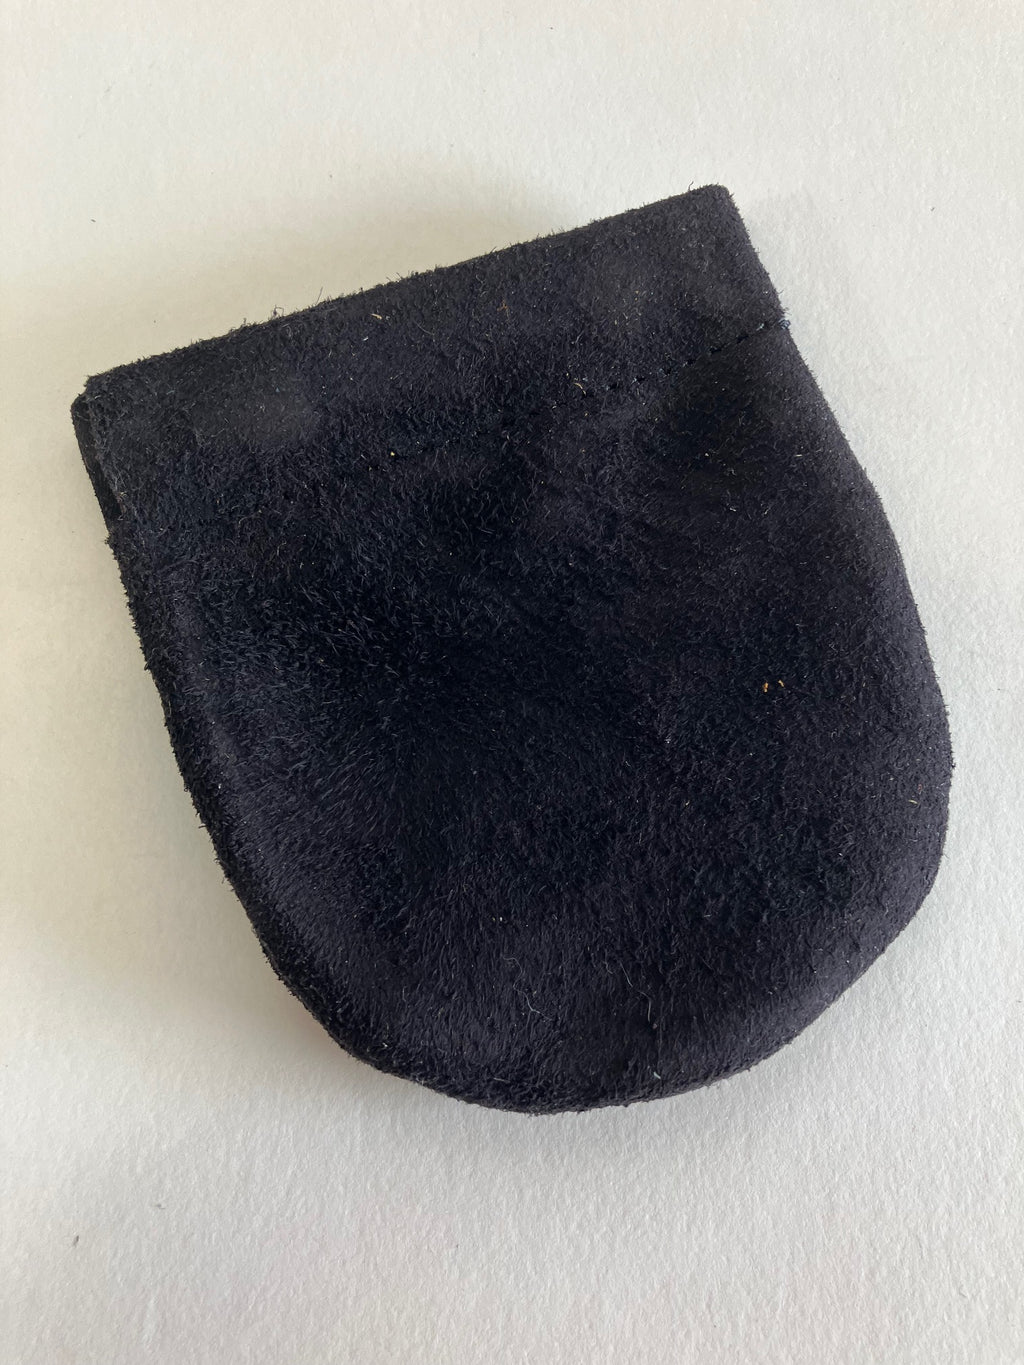 SAMPLE Leather wallet, squeeze frame coin purse black suede